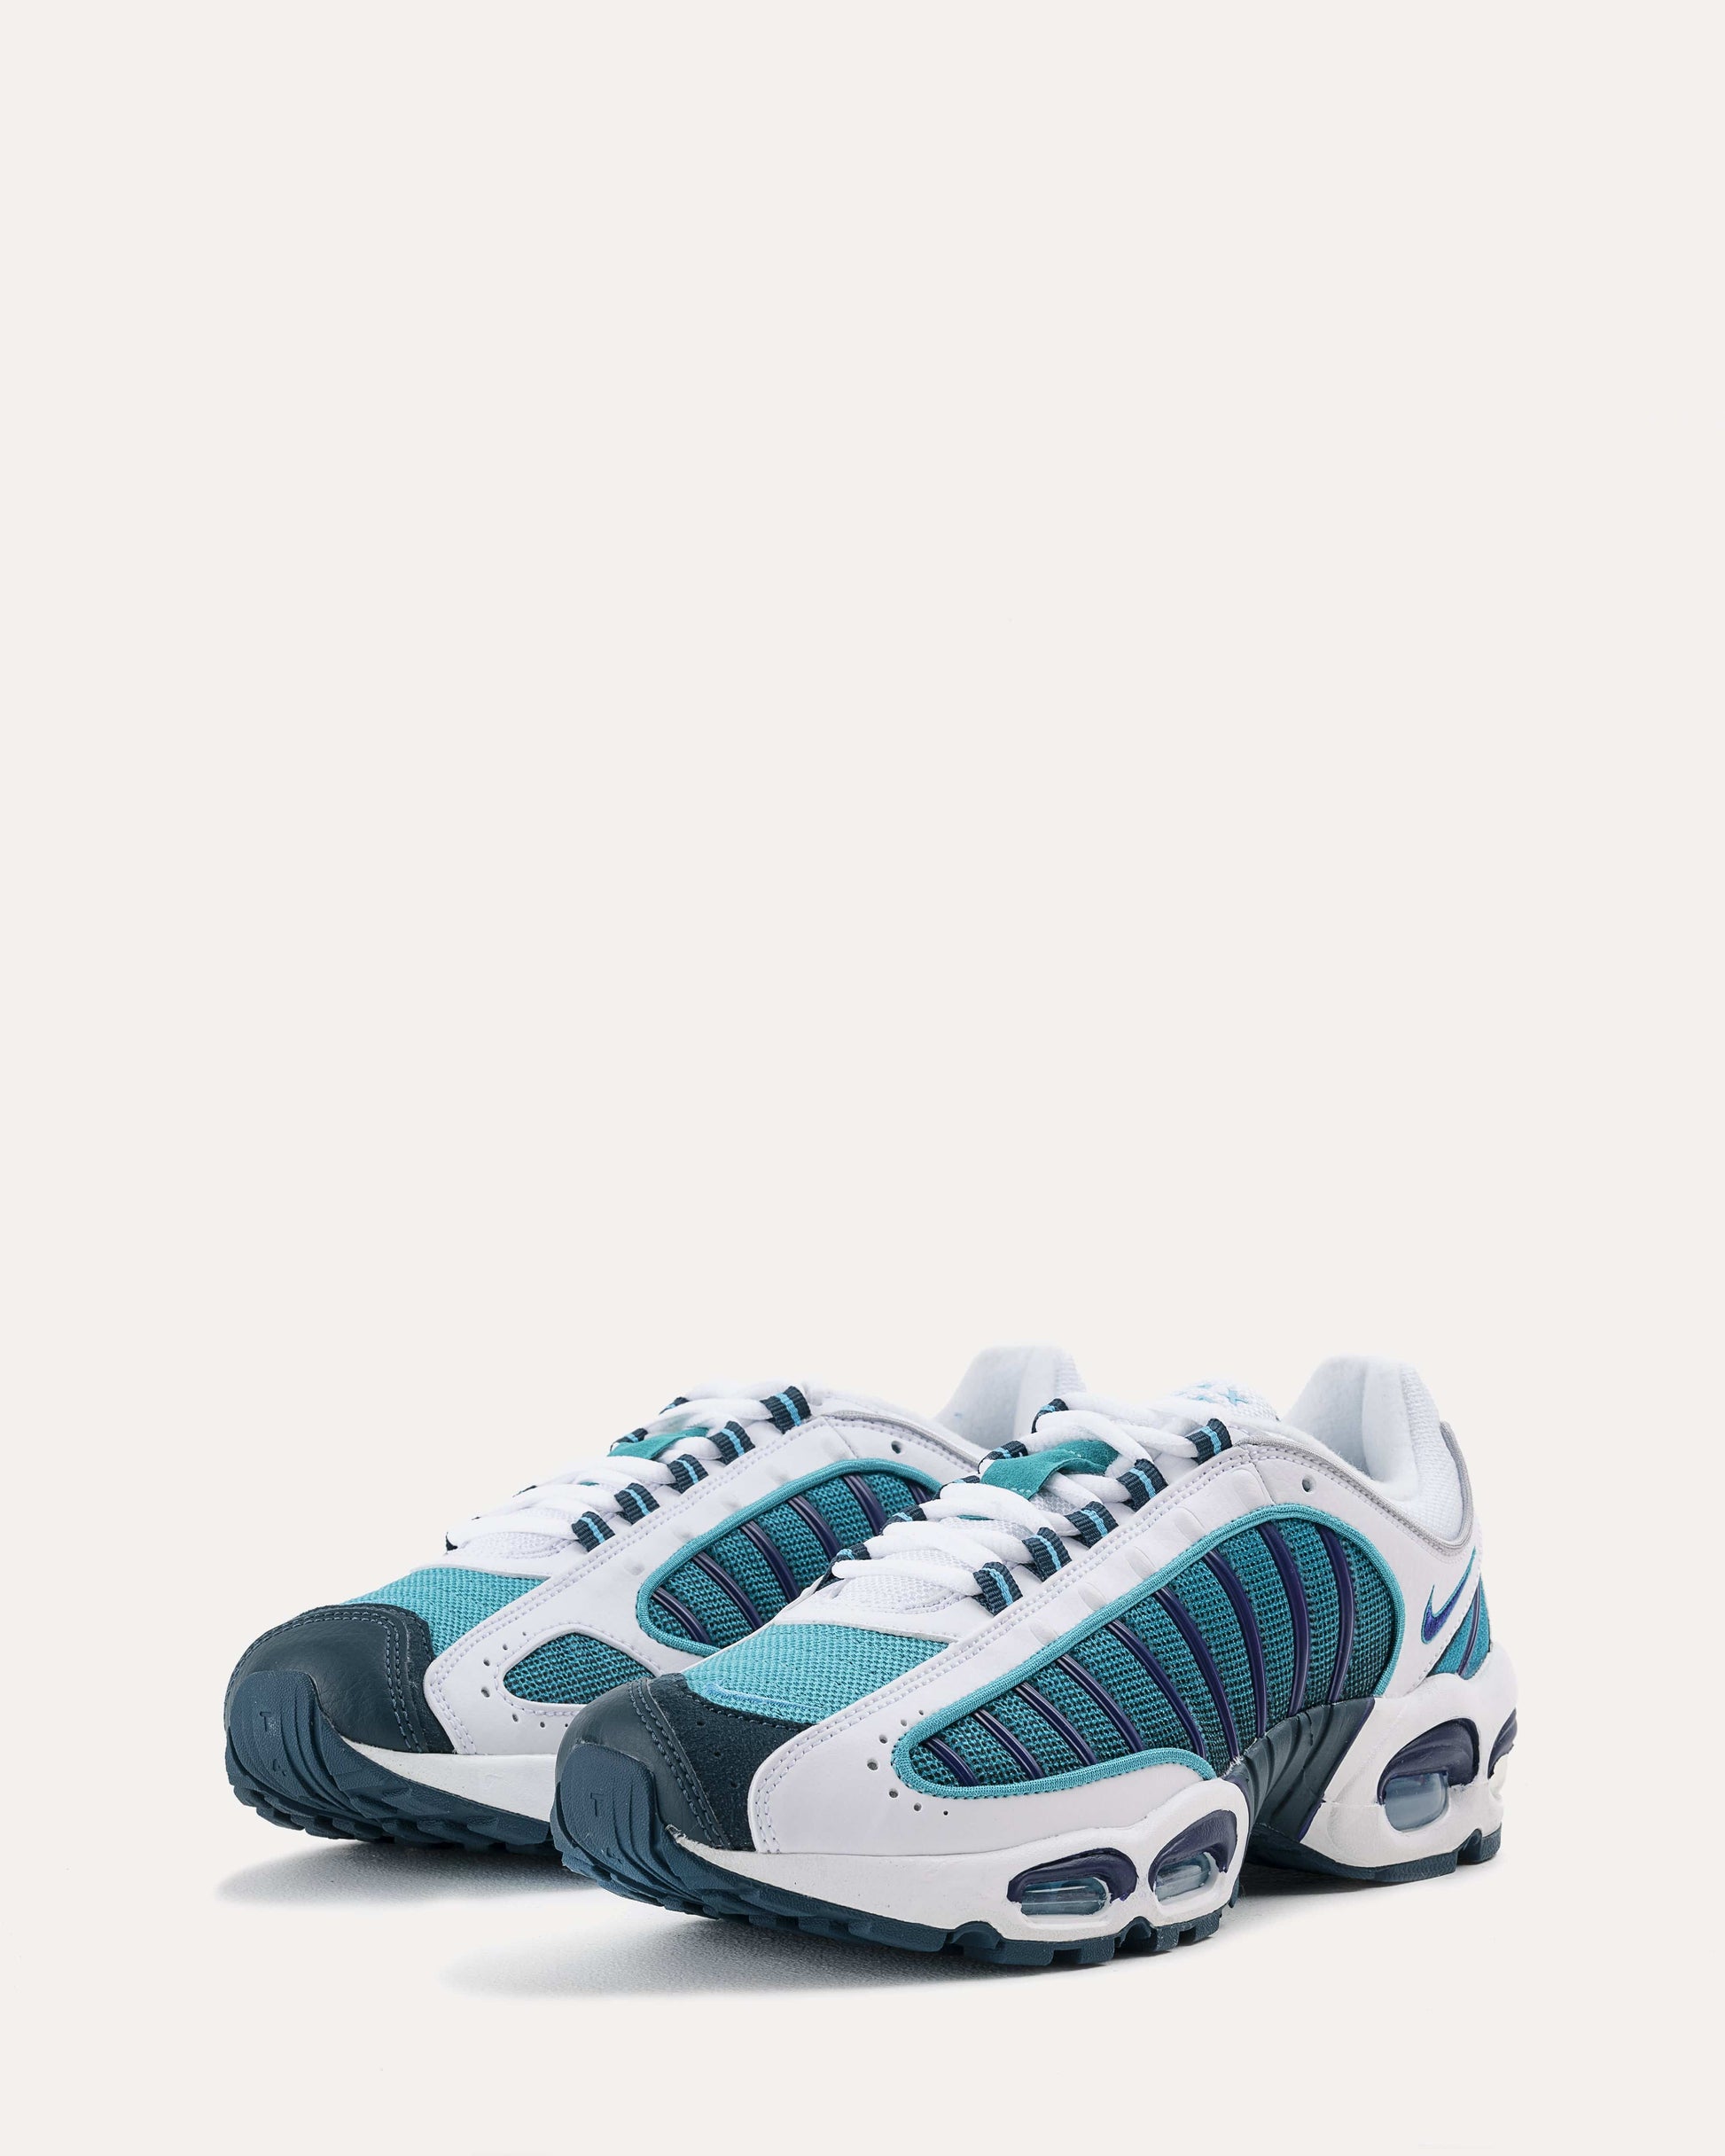 Nike Unisex Air Max Tailwind IV in Teal